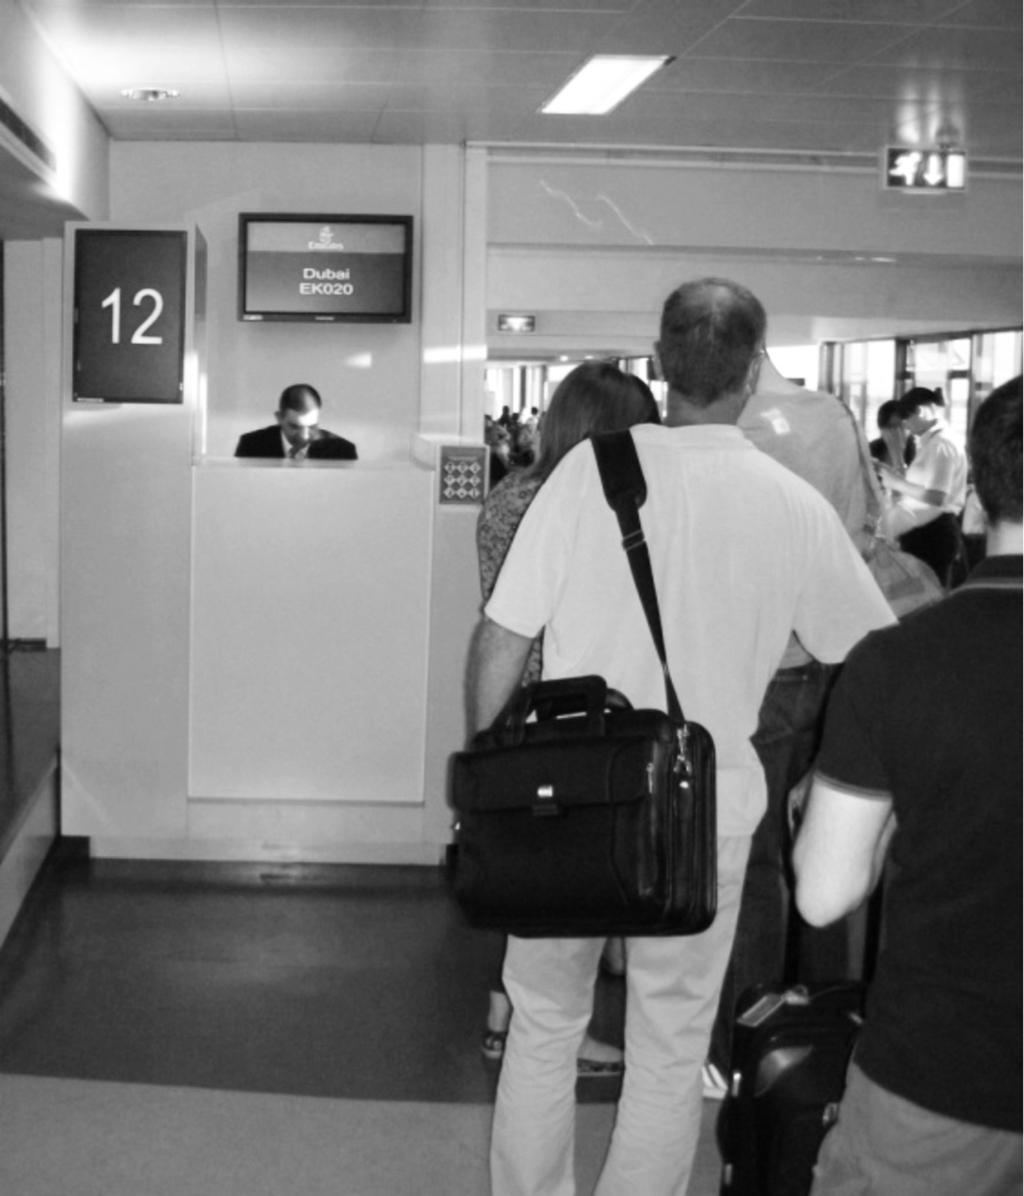 2 1 Refer to Photograph A, taken by an international traveller waiting to board an Emirates flight from Manchester to Dubai.